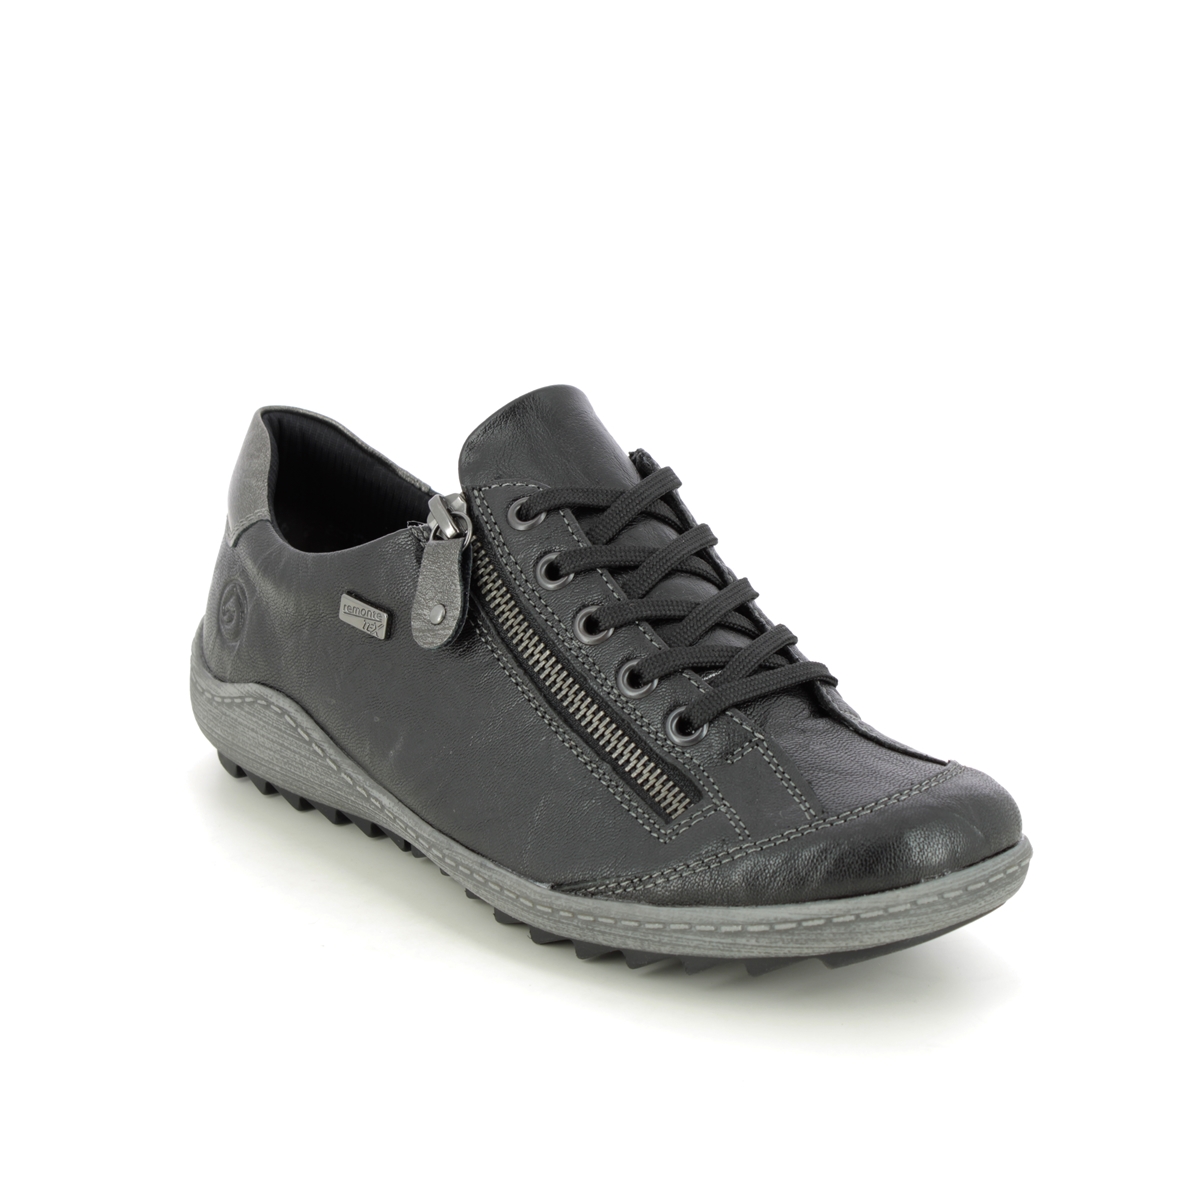 Remonte Zigzip 85 Tex Black Leather Womens Lacing Shoes R1402-06 In Size 41 In Plain Black Leather